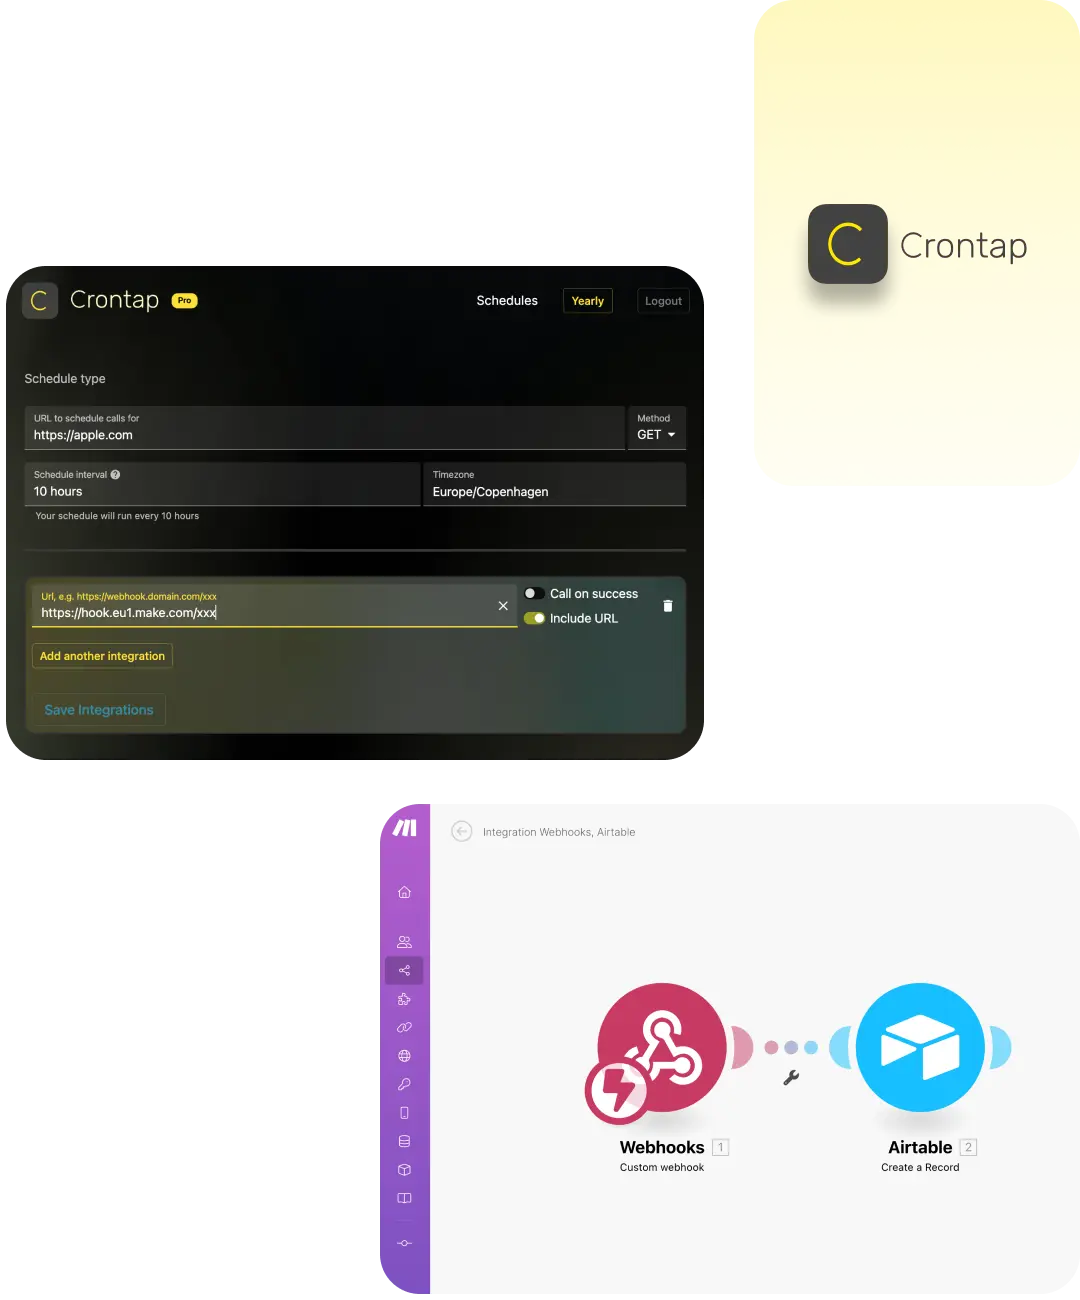 Learn how to leverage Crontap webhook schedules to seamlessly integrate Airtable with your workflows, enabling automated tasks and efficient data management.